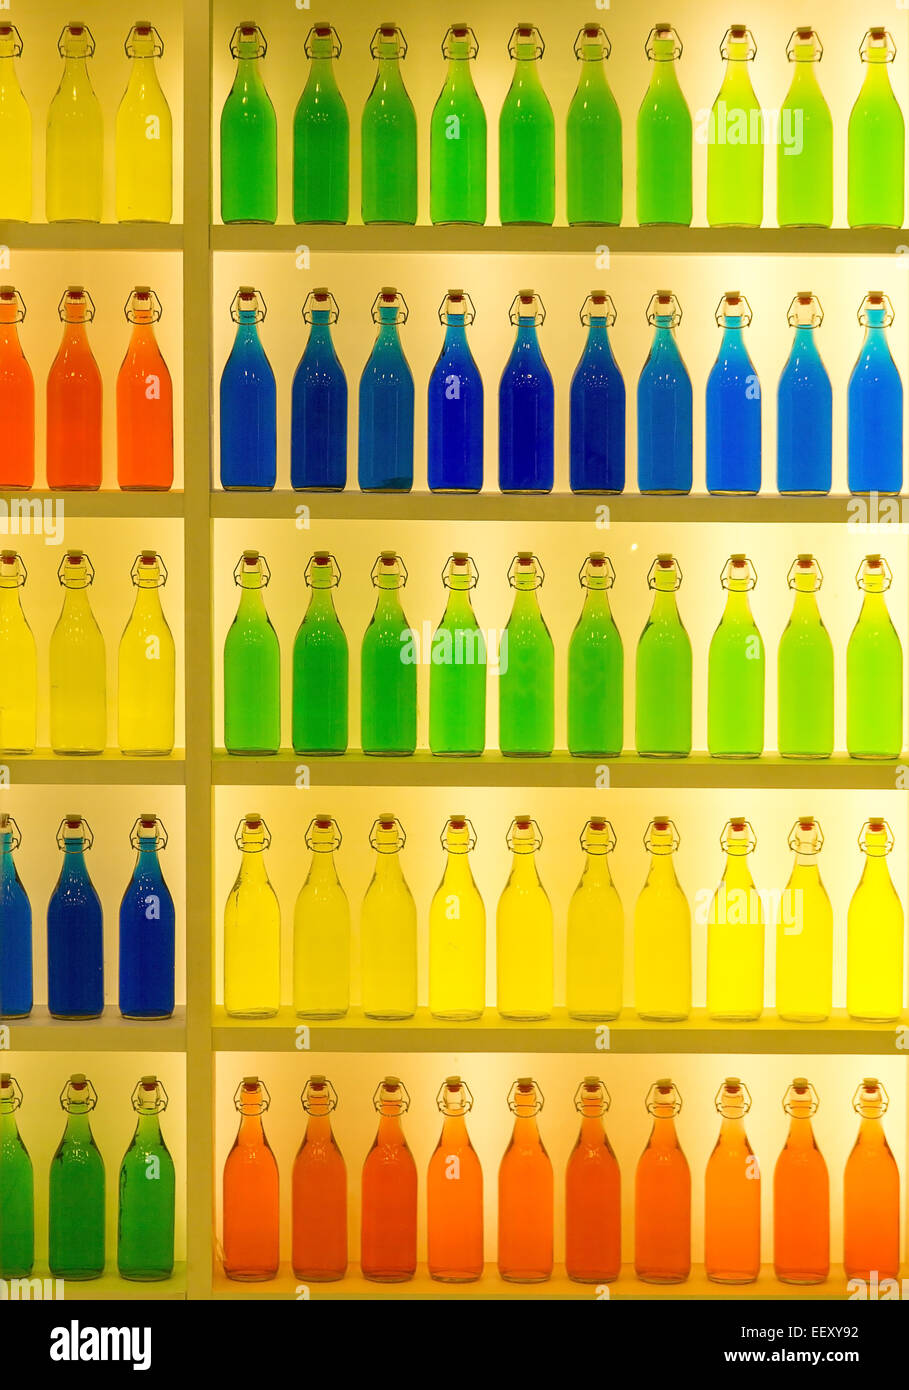 exhibition bottles with different colored liquid Stock Photo